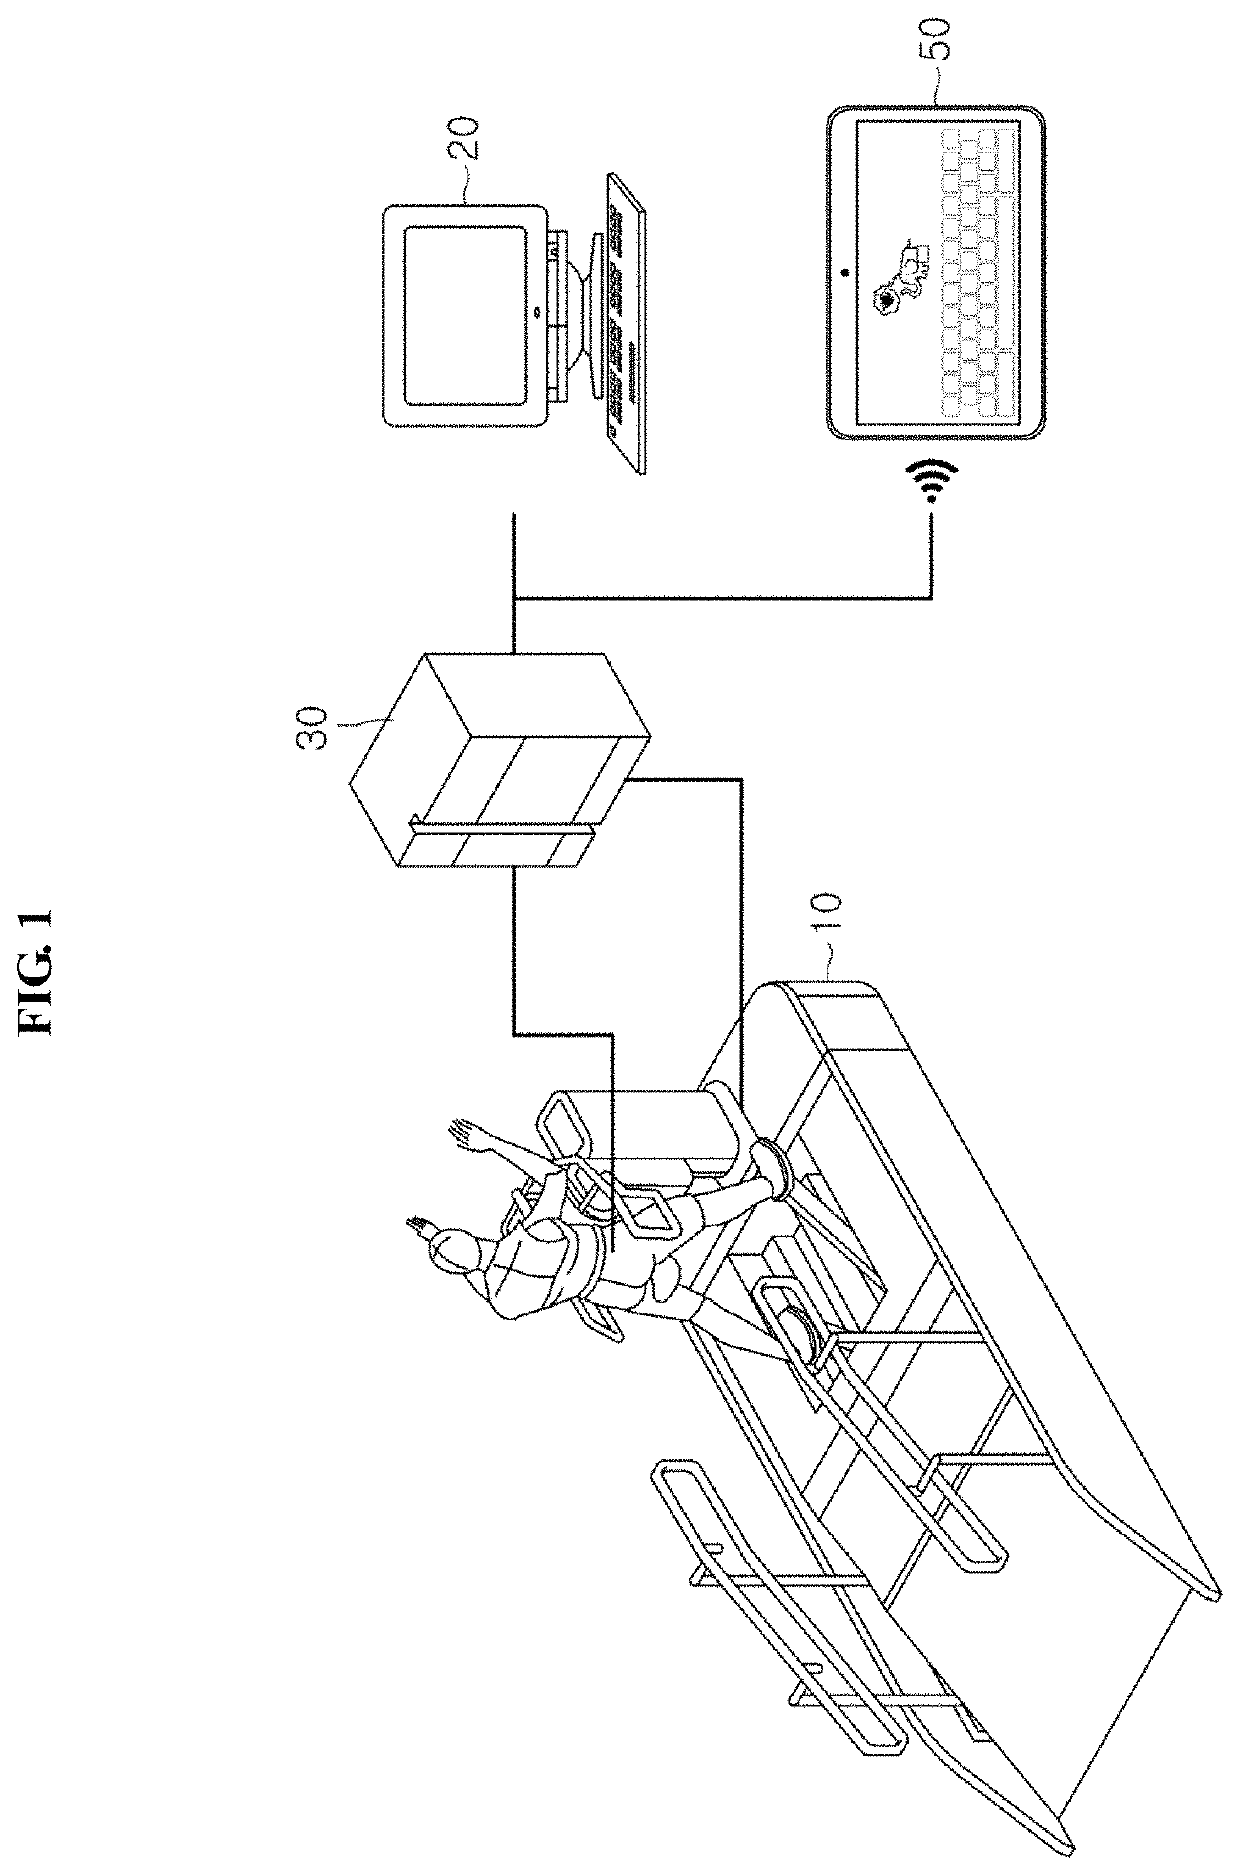 Gait rehabilitation control system and method therefor